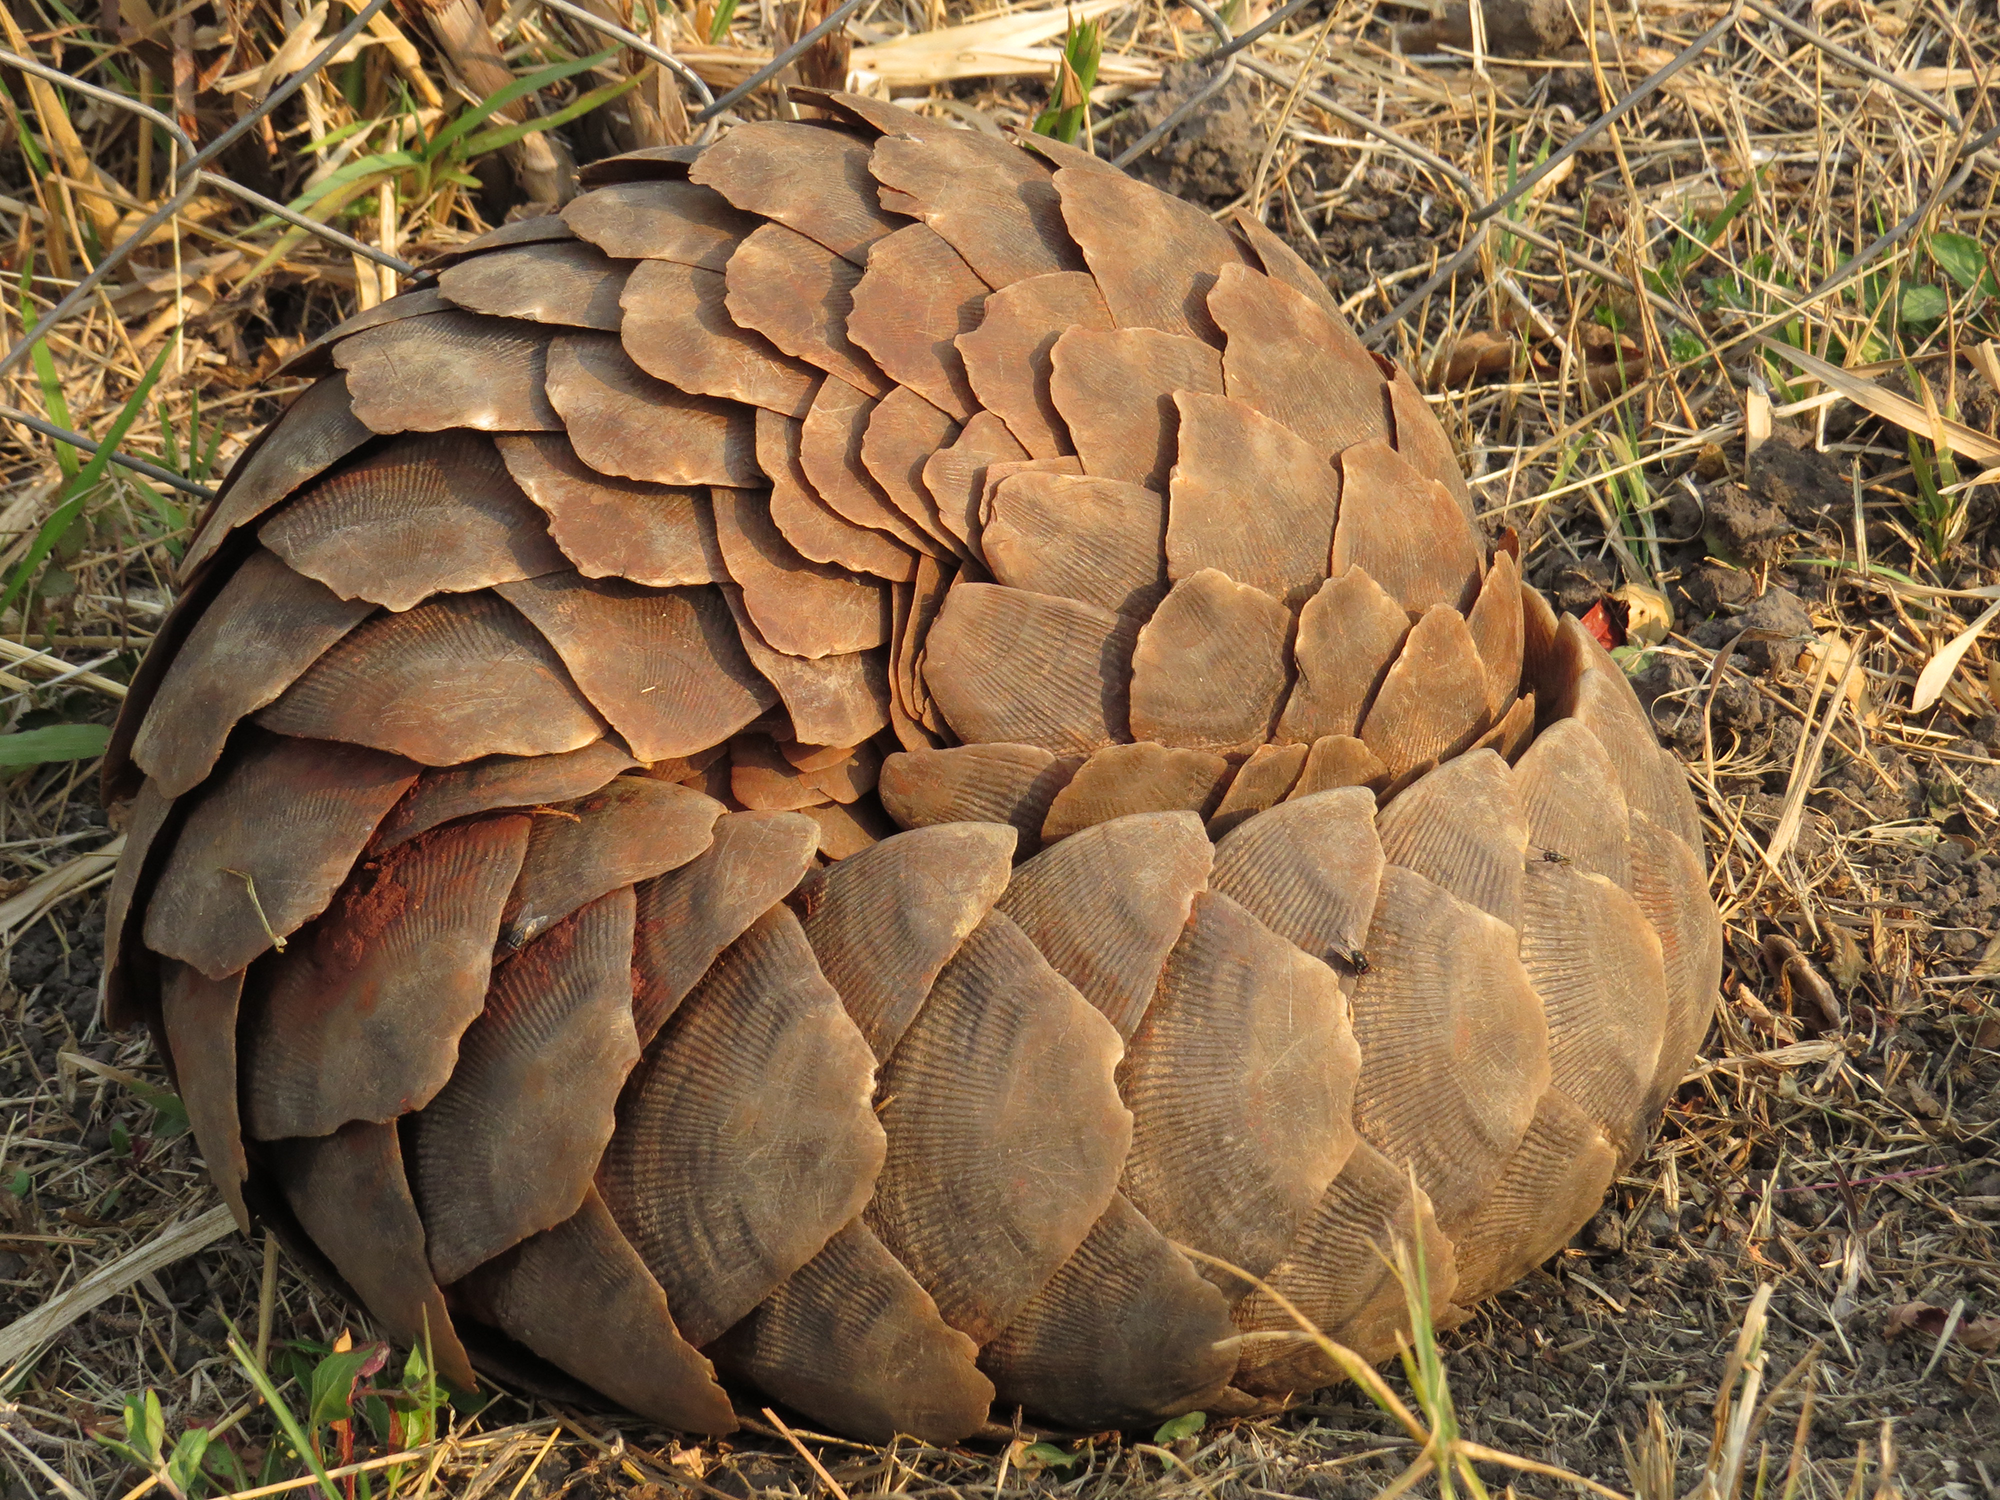 Living on Earth: At Risk the Pangolin- A Mammal With Scales